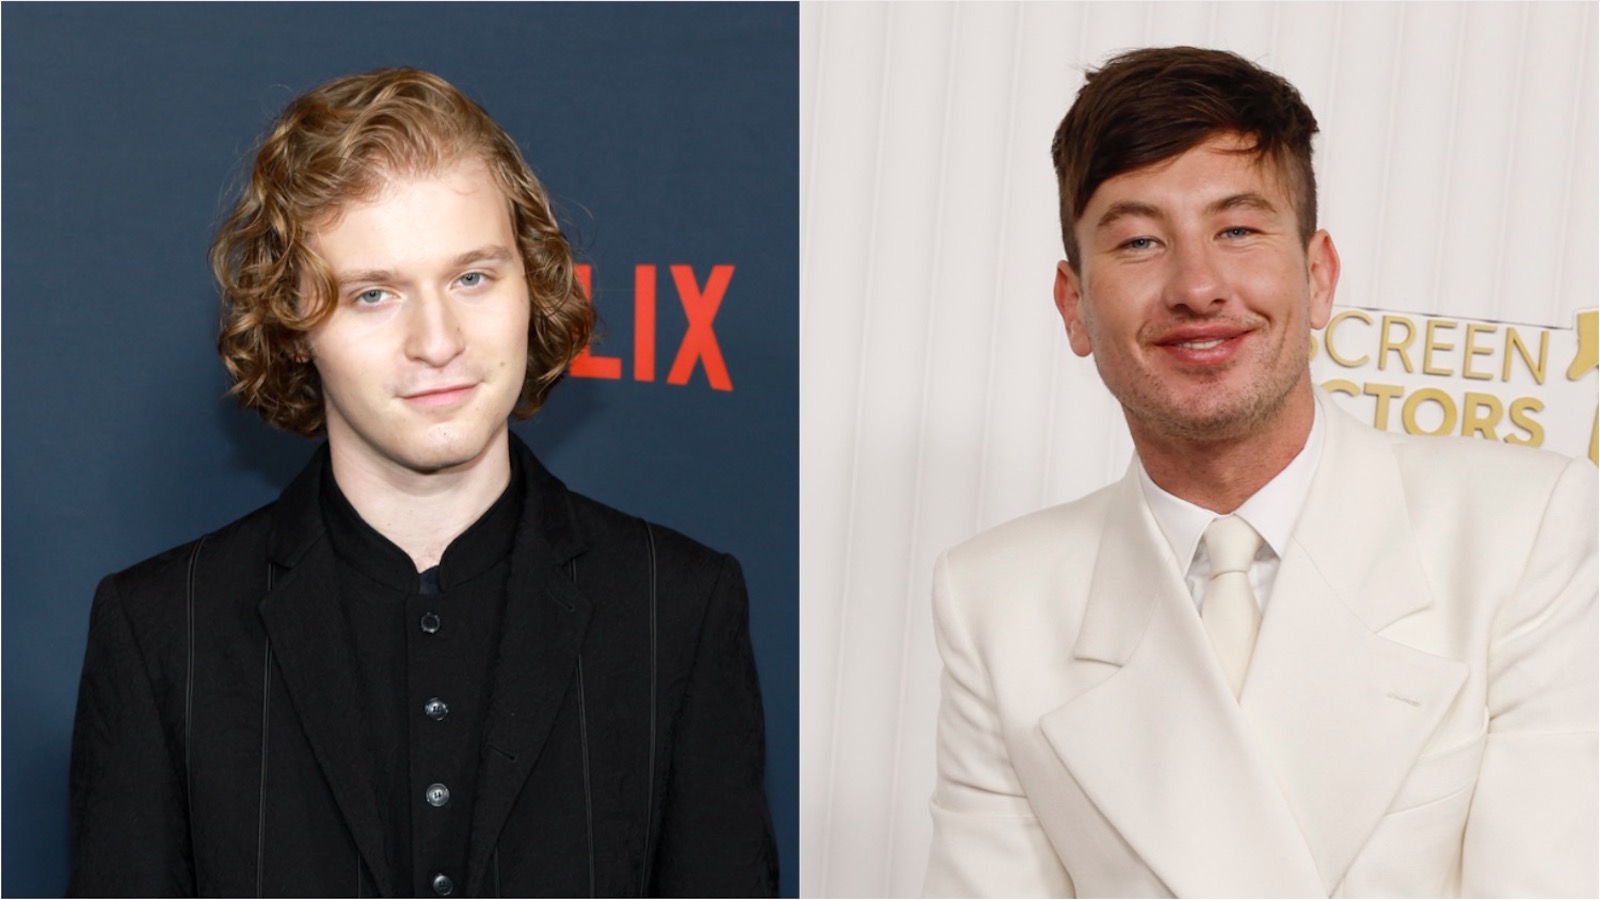 Il Gladiatore 2: Fred Hechinger sostituisce Barry Keoghan (che sarà impegnato in The Batman 2?)